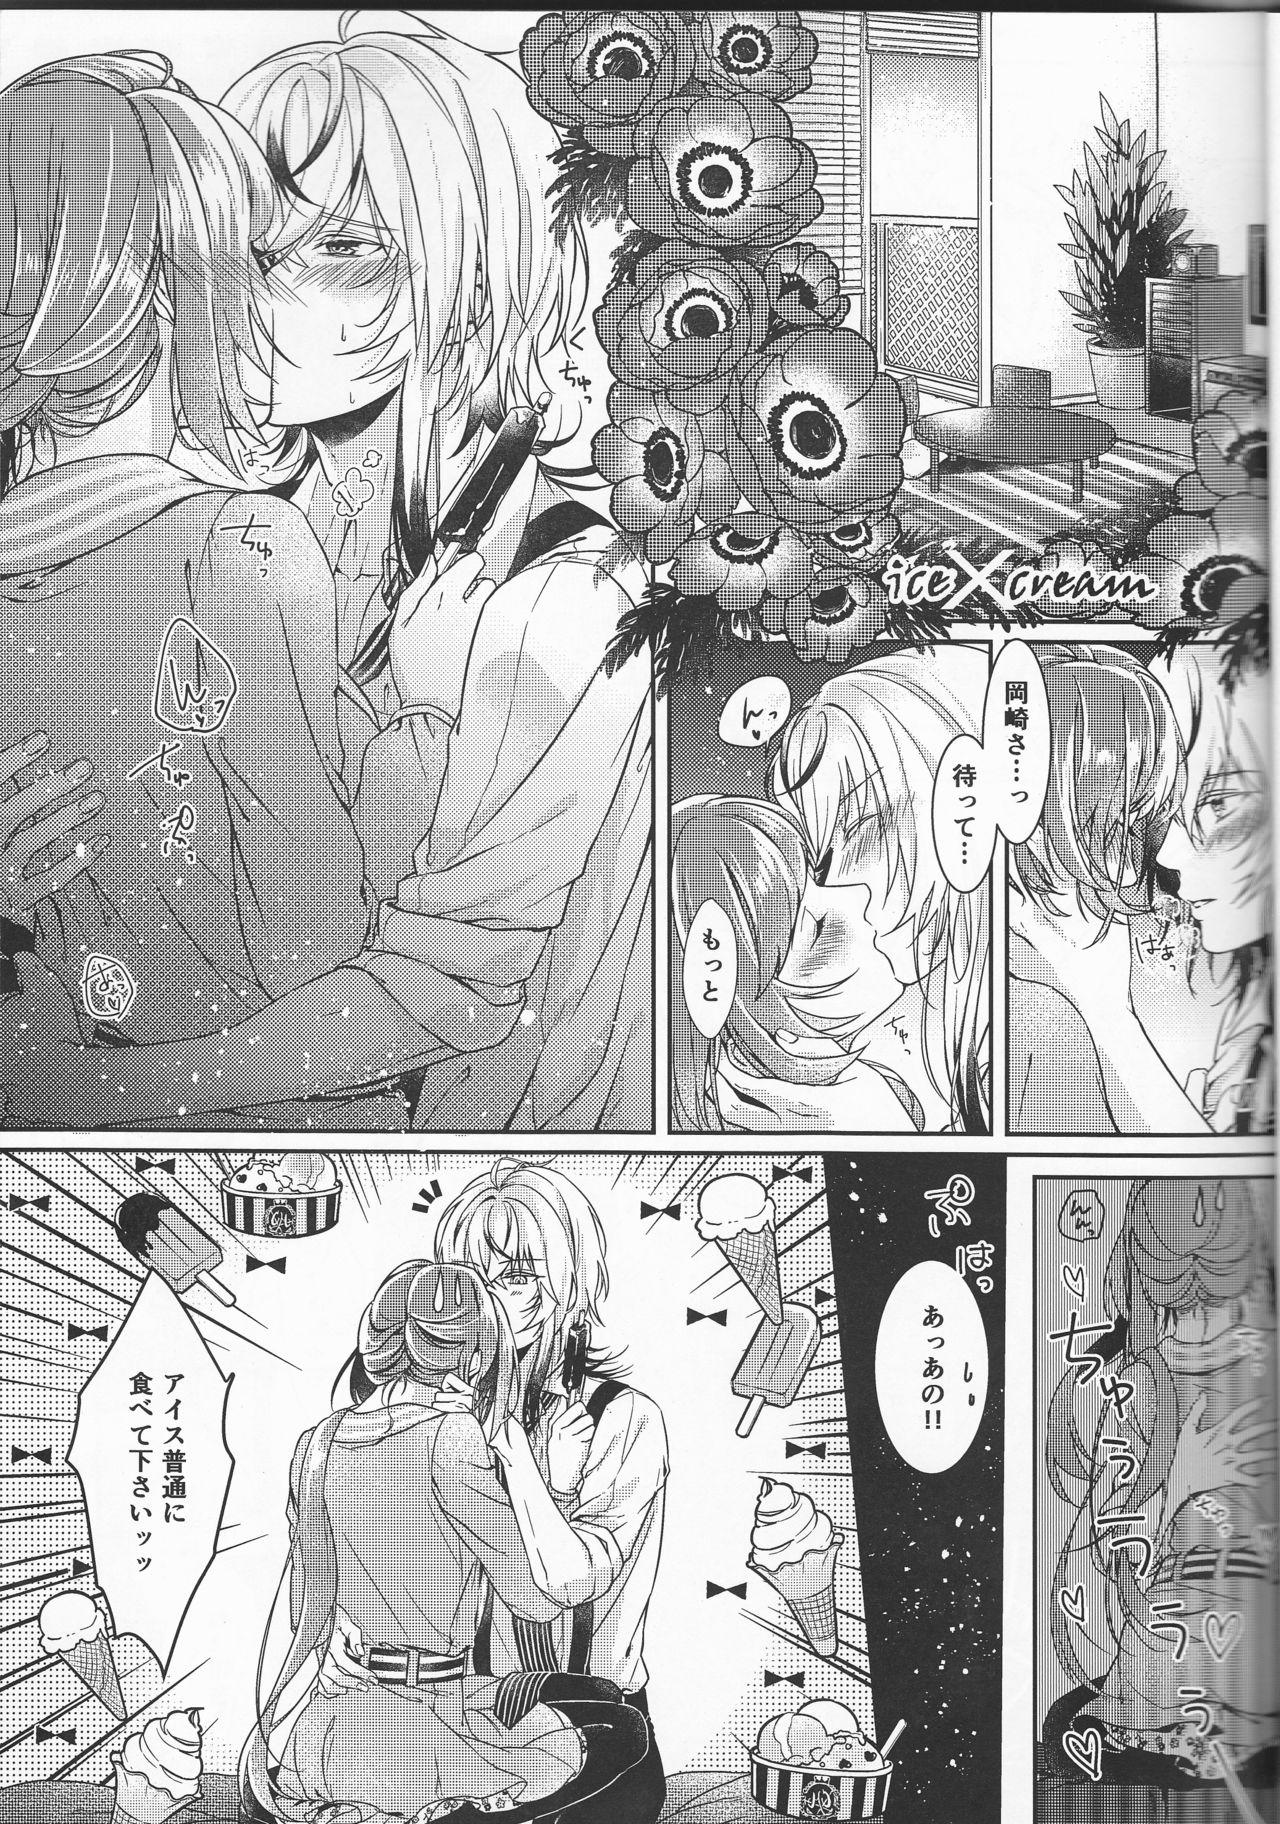 Home Catch a Cold? - Collar x malice Jap - Page 9